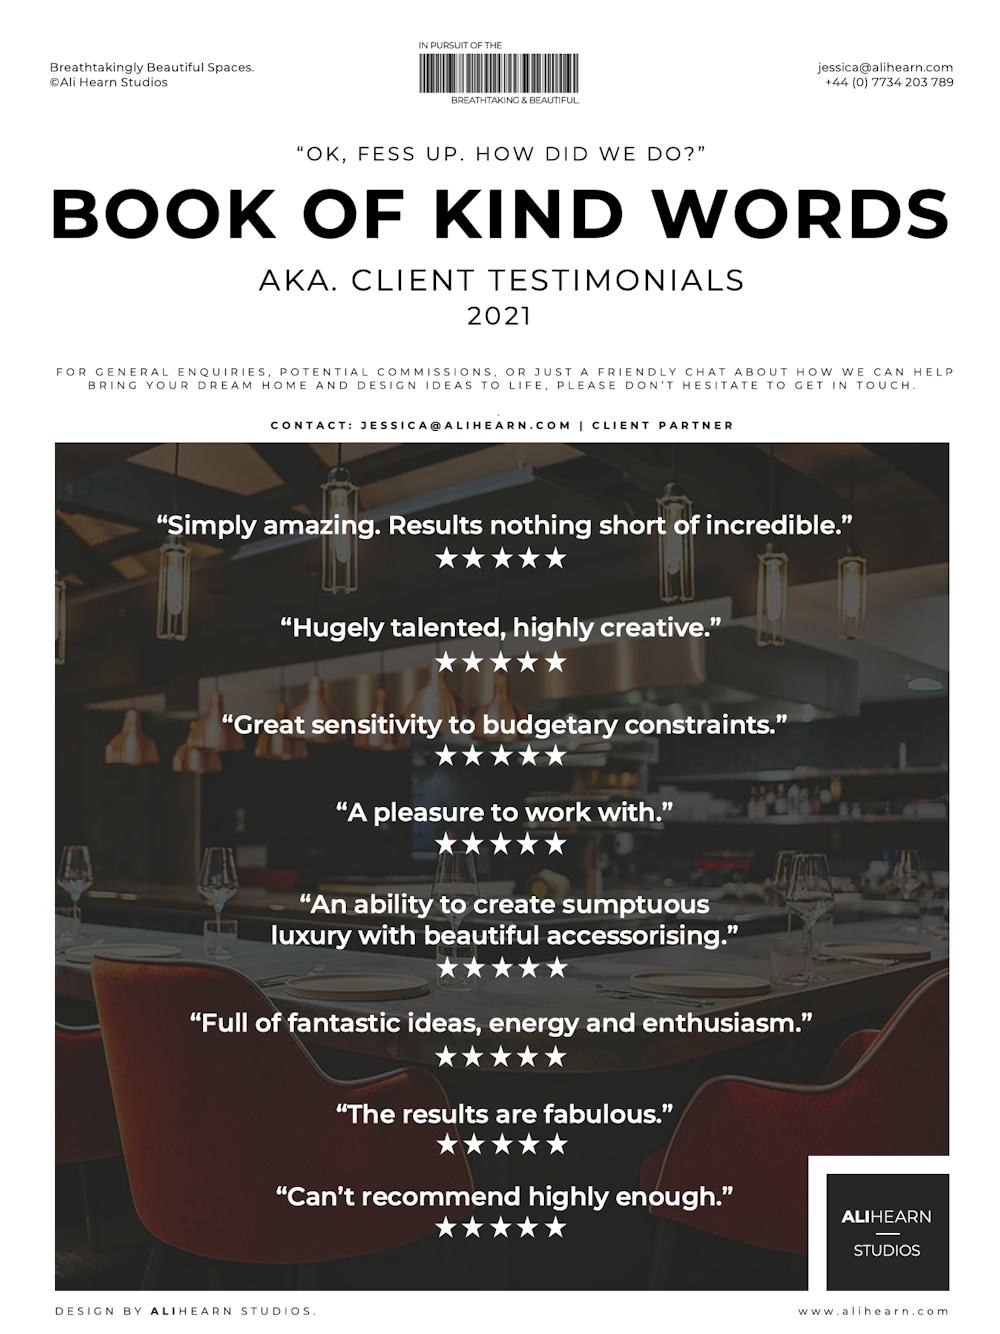 Book of Kind Words